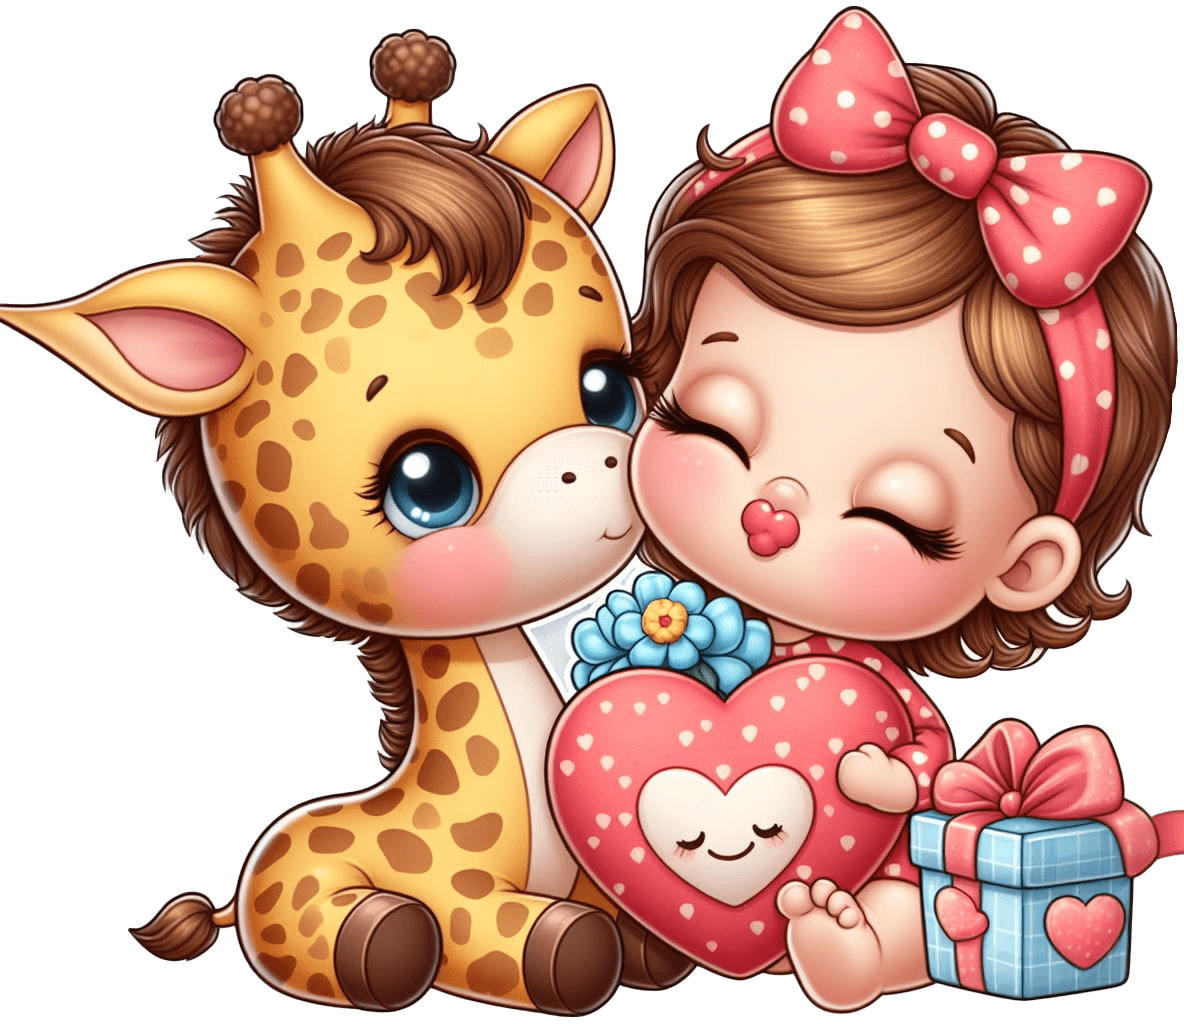 Girl And Giraffe Valentine's Sticker With Heart And Gift - Cute Love Illustration 